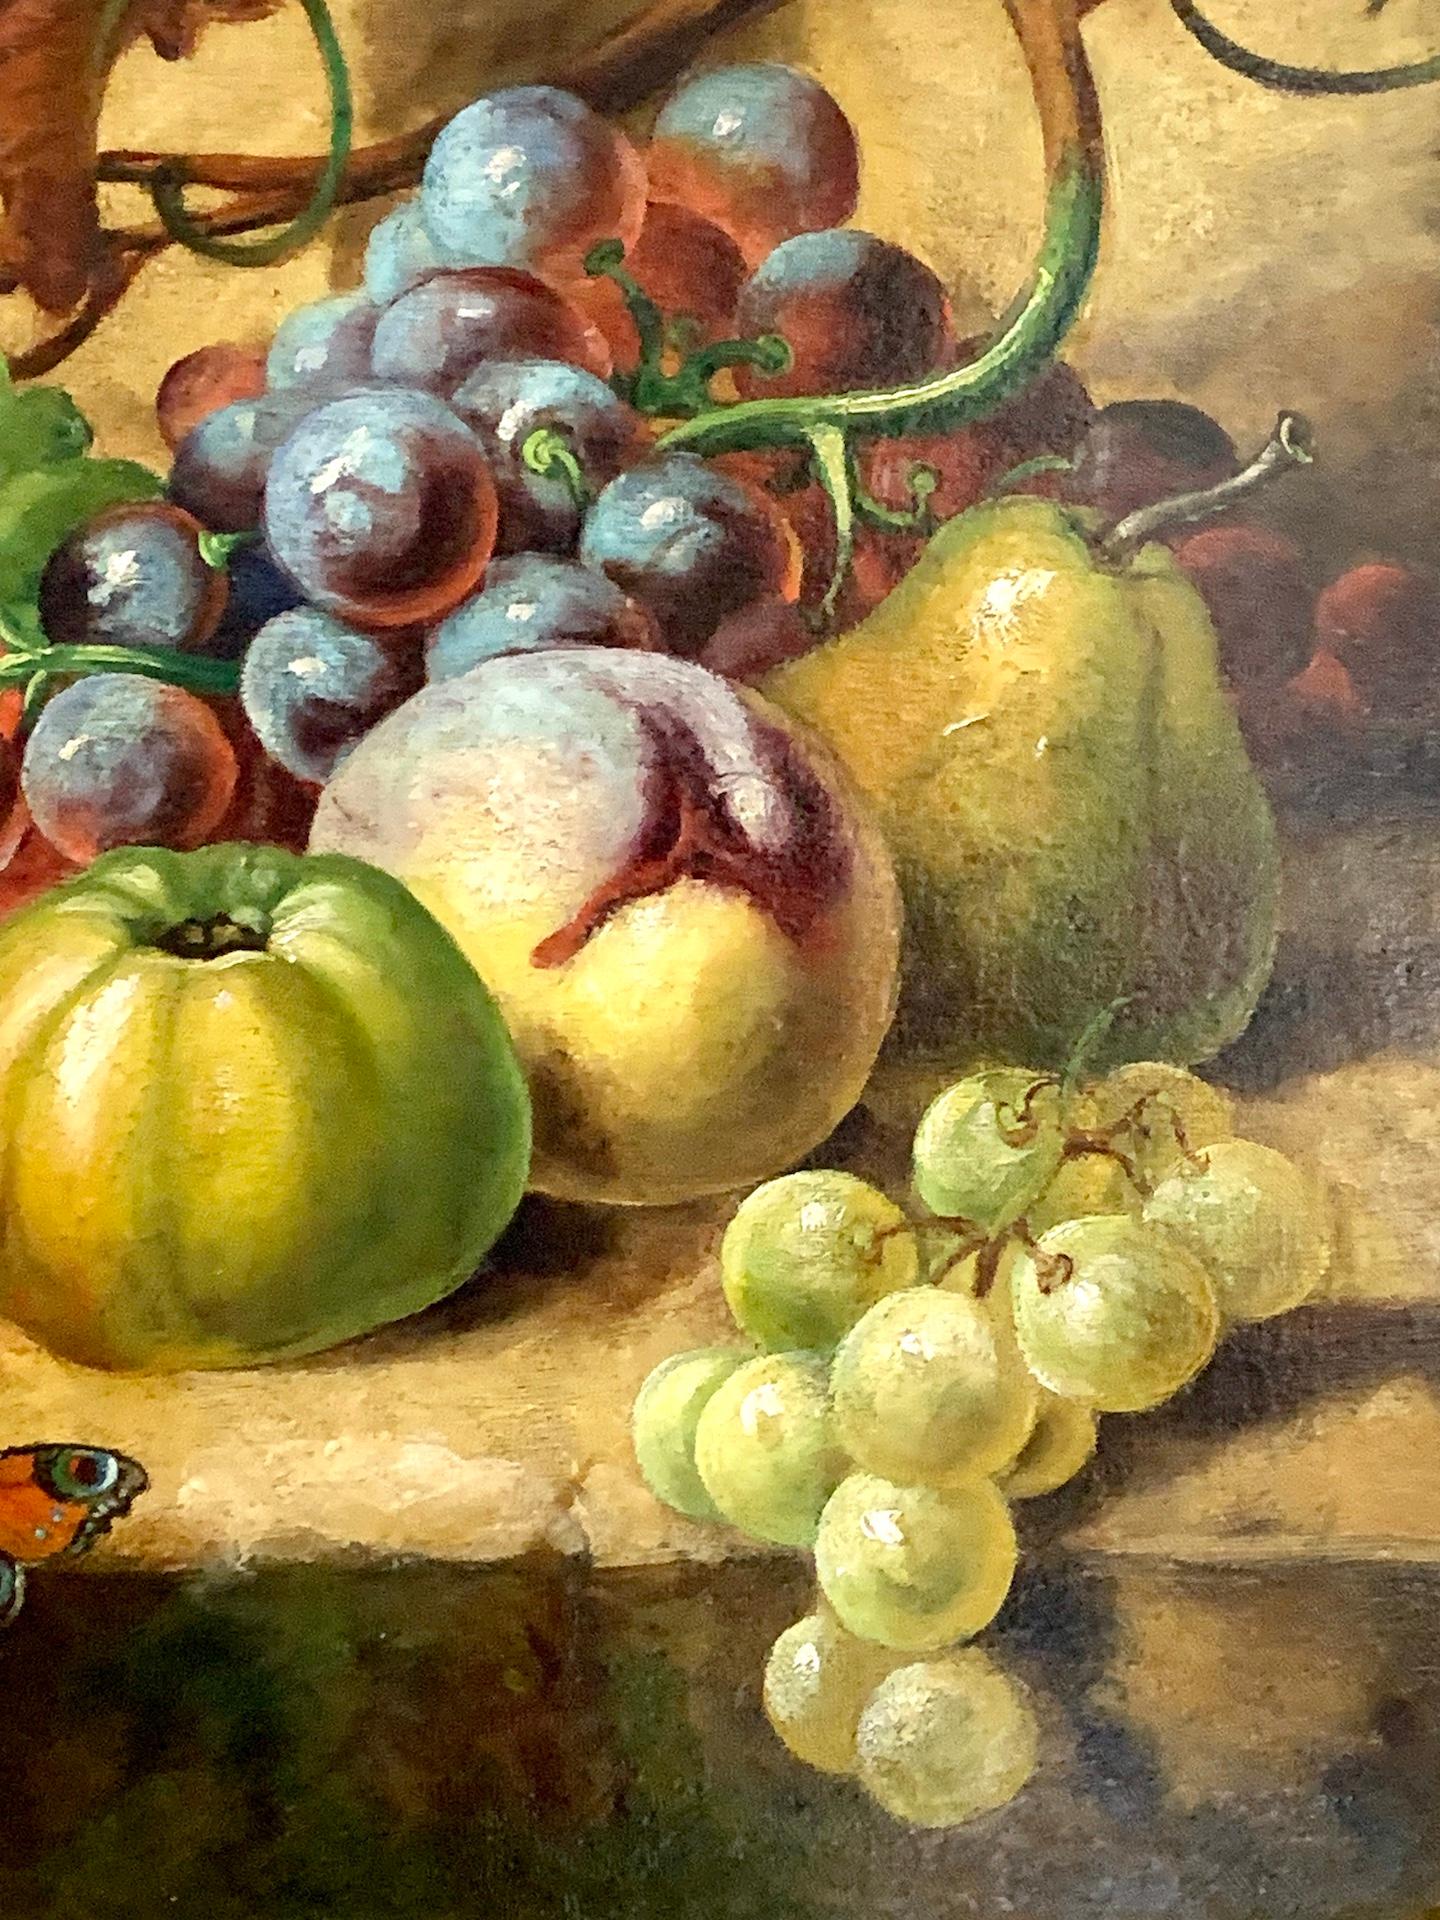 19th century French or Flemish Still life of fruit, original frame - Painting by 19th century French or Flemish school